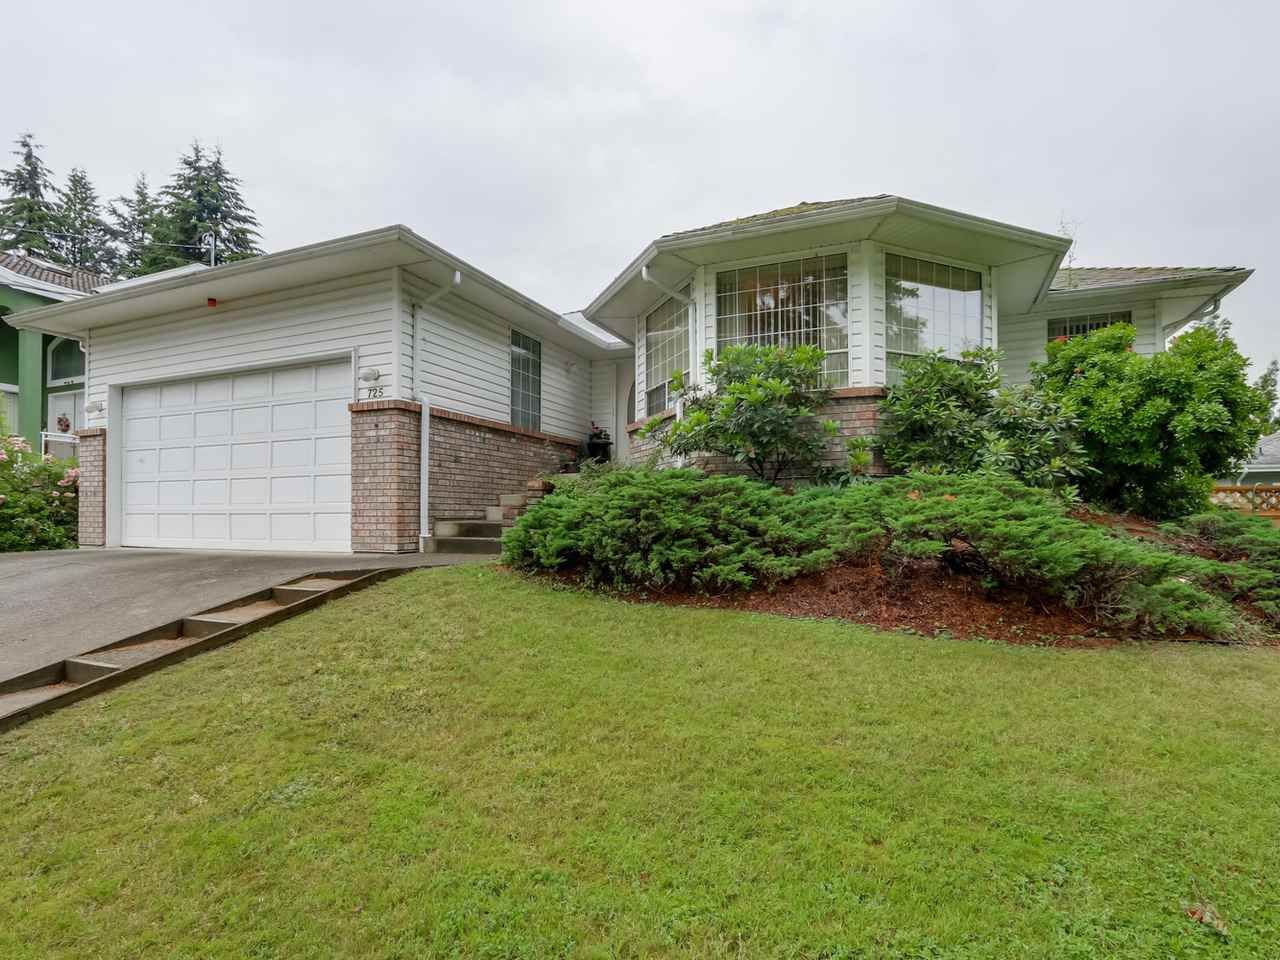 Main Photo: 725 ROBINSON Street in Coquitlam: Coquitlam West House for sale : MLS®# R2080474